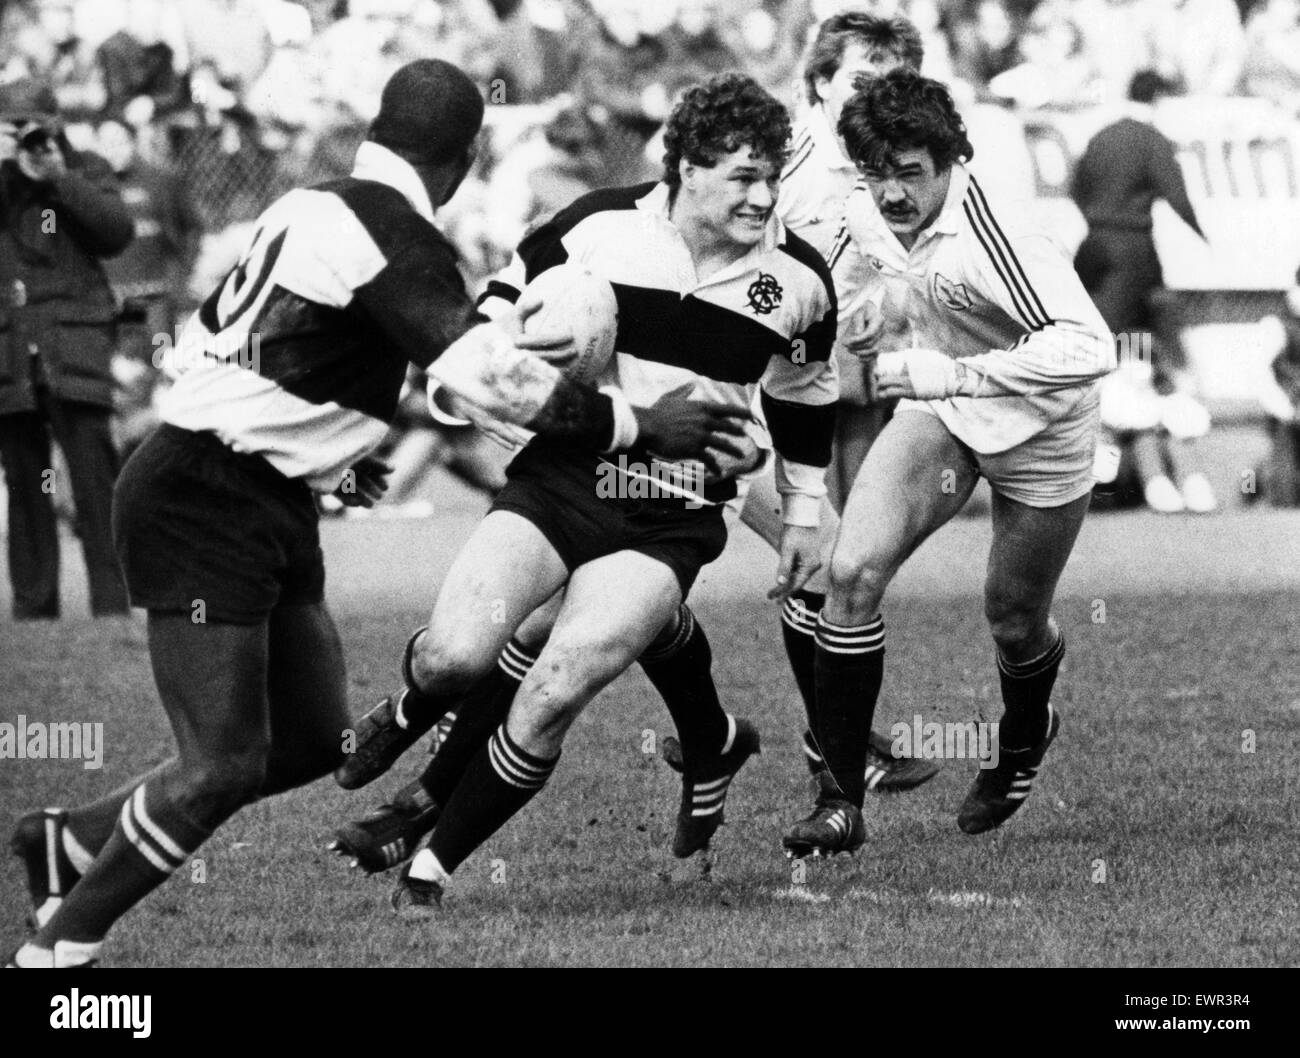 Barbarian David Pickering looks inside for support during the game against Swansea at St Helens. 6th April 1983. Stock Photo